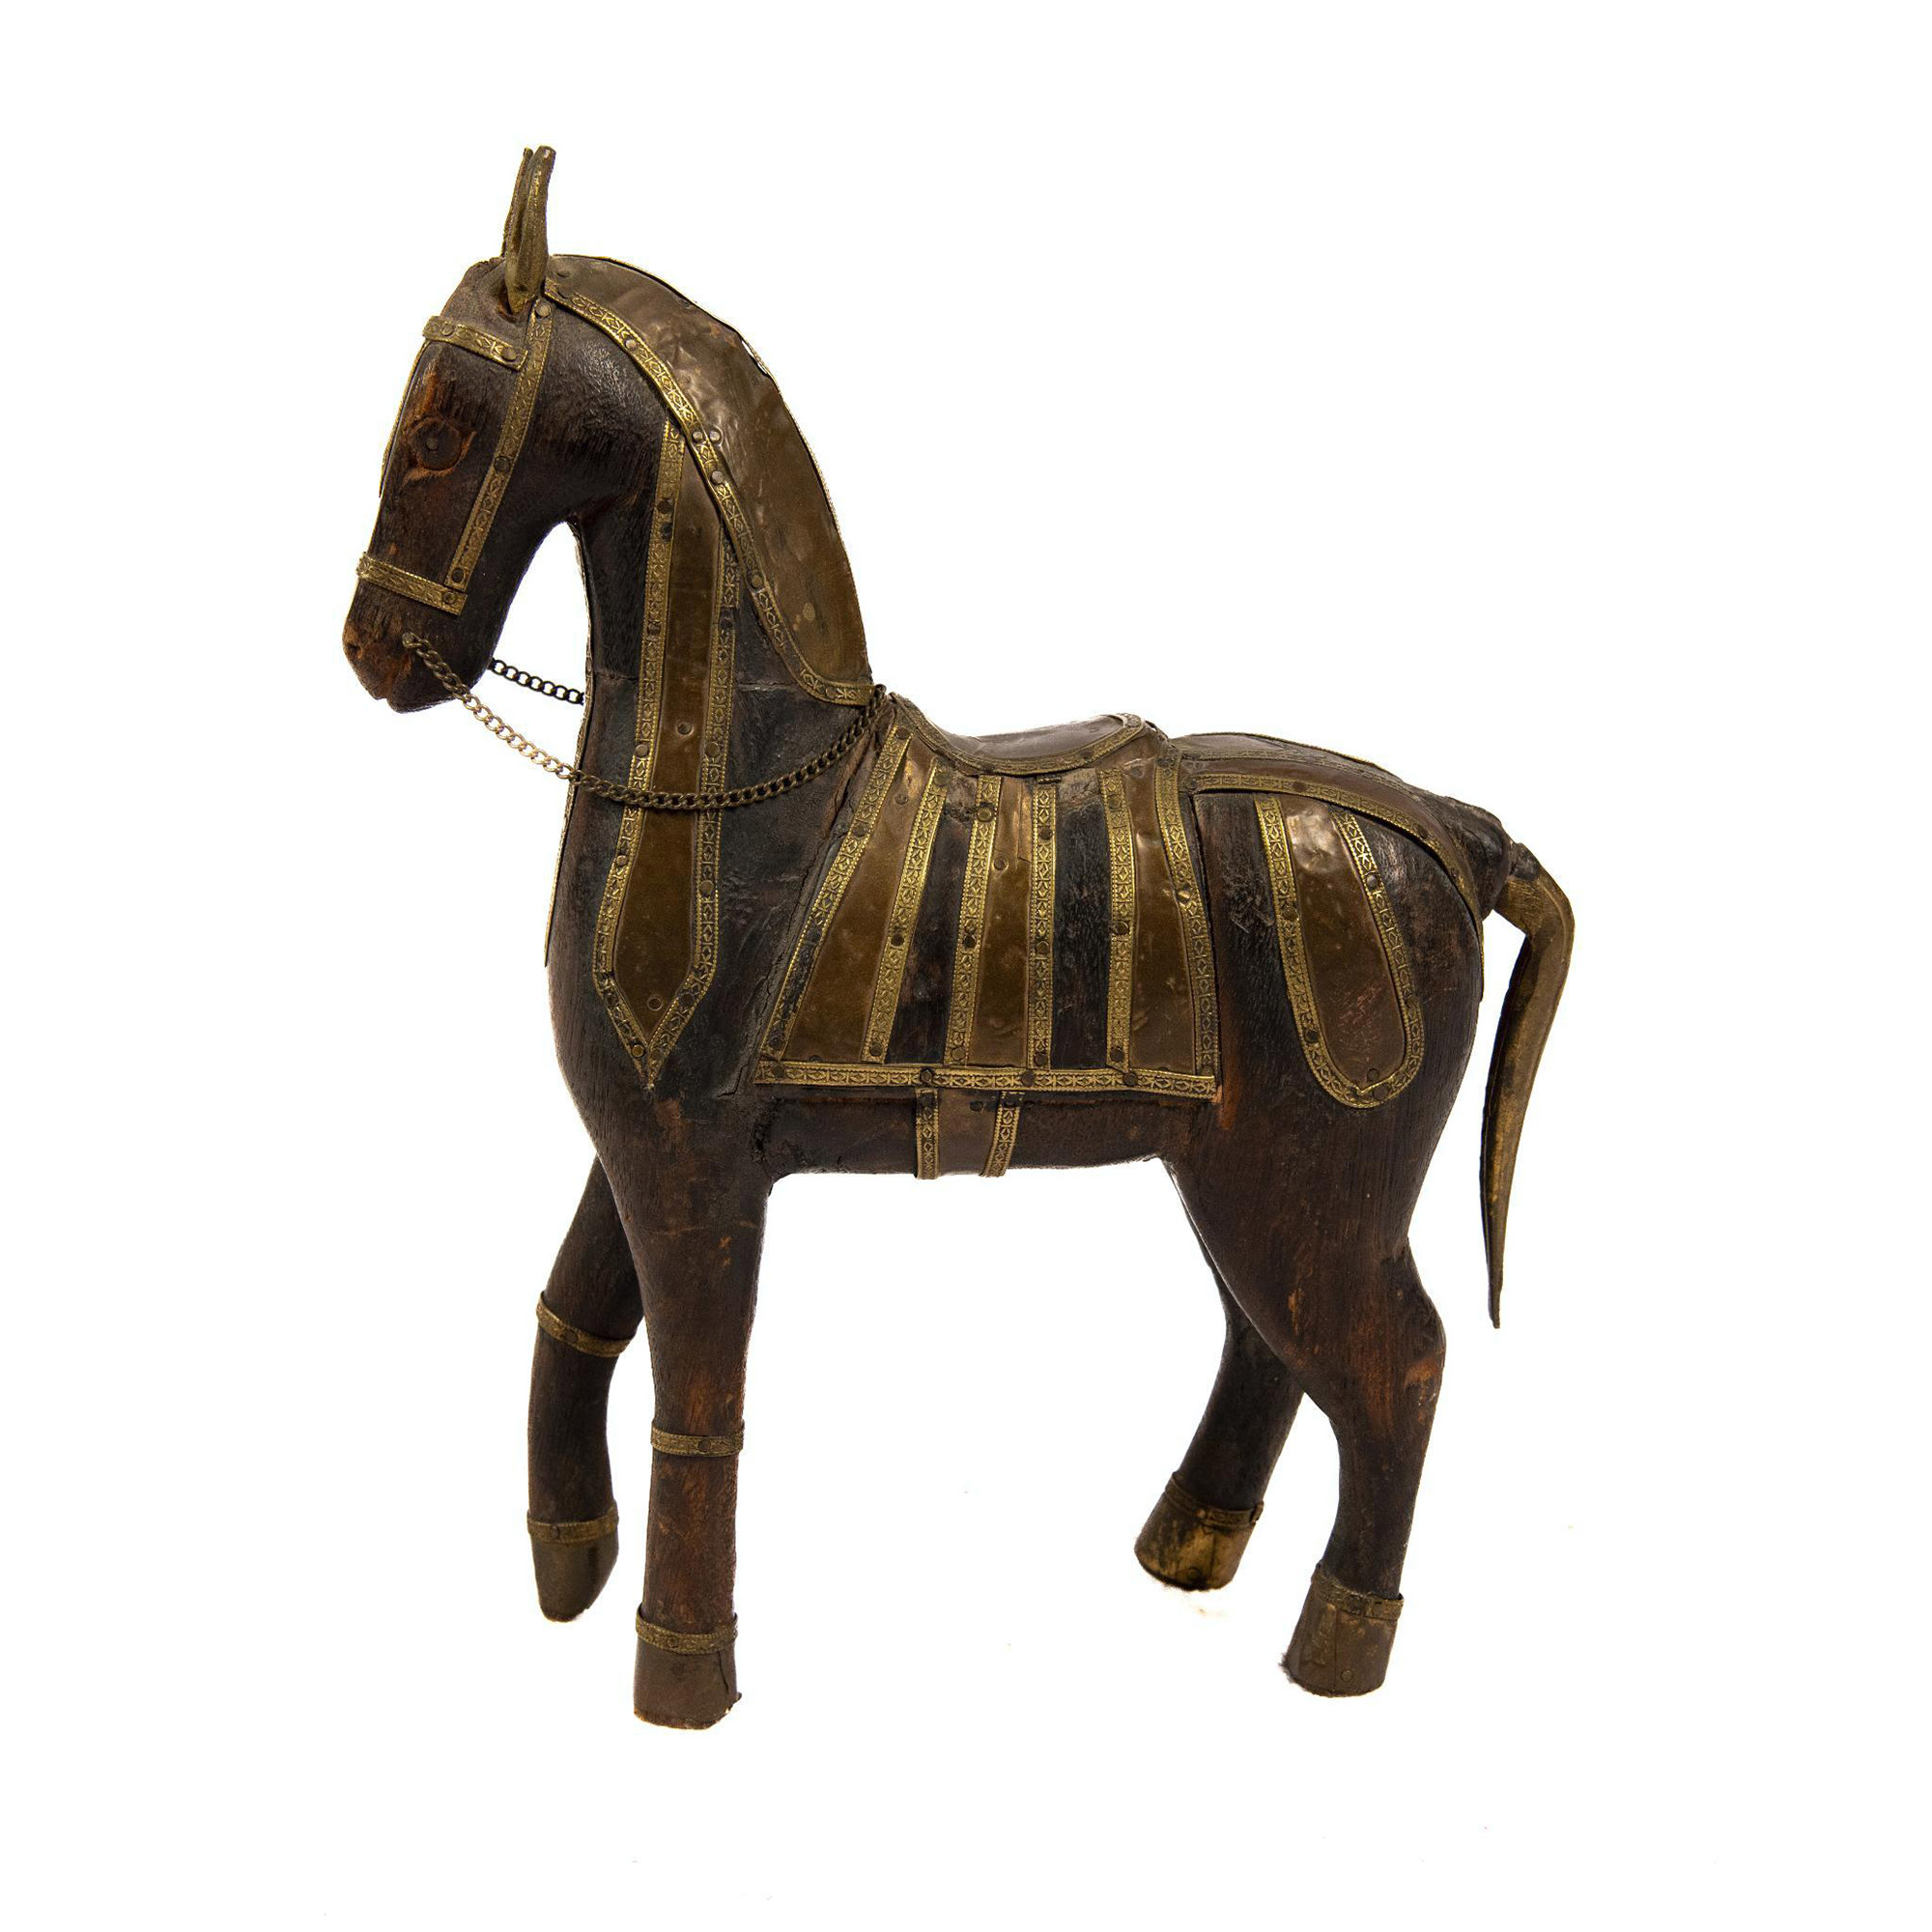 Rajasthani Brass and Wooden War Horse Sculpture - Image 2 of 4